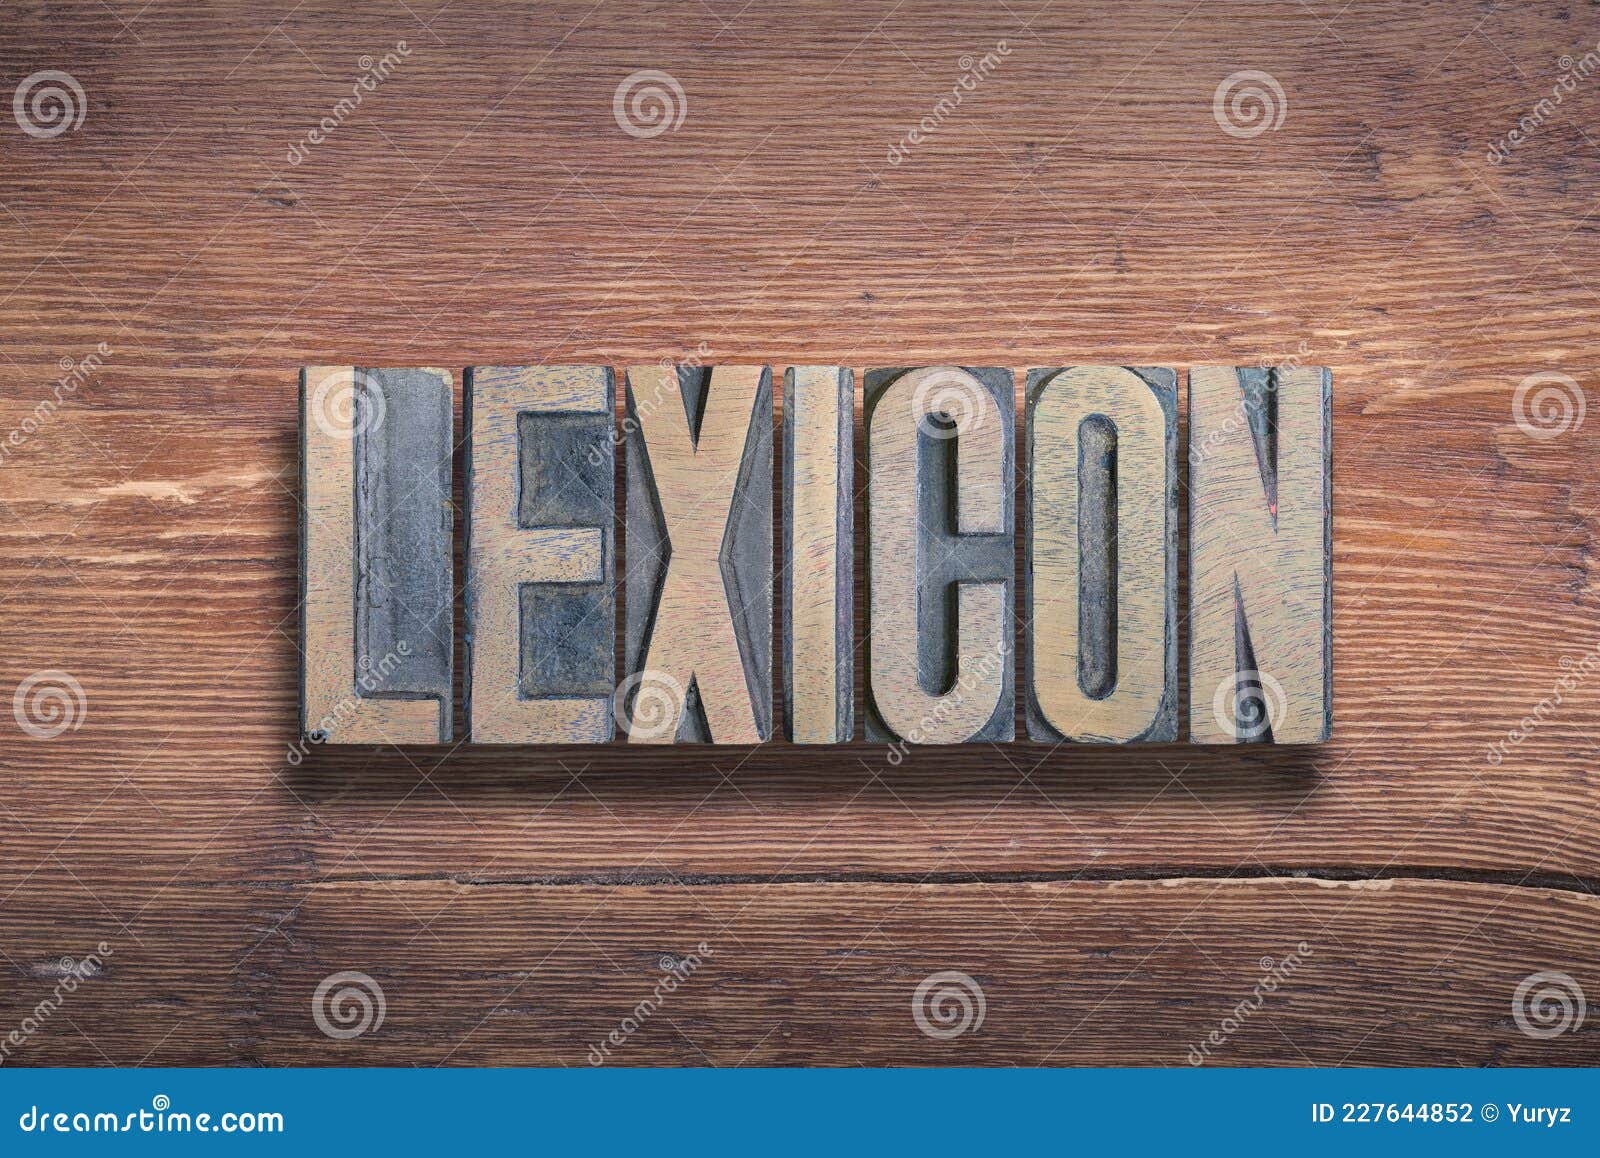 lexicon word wood